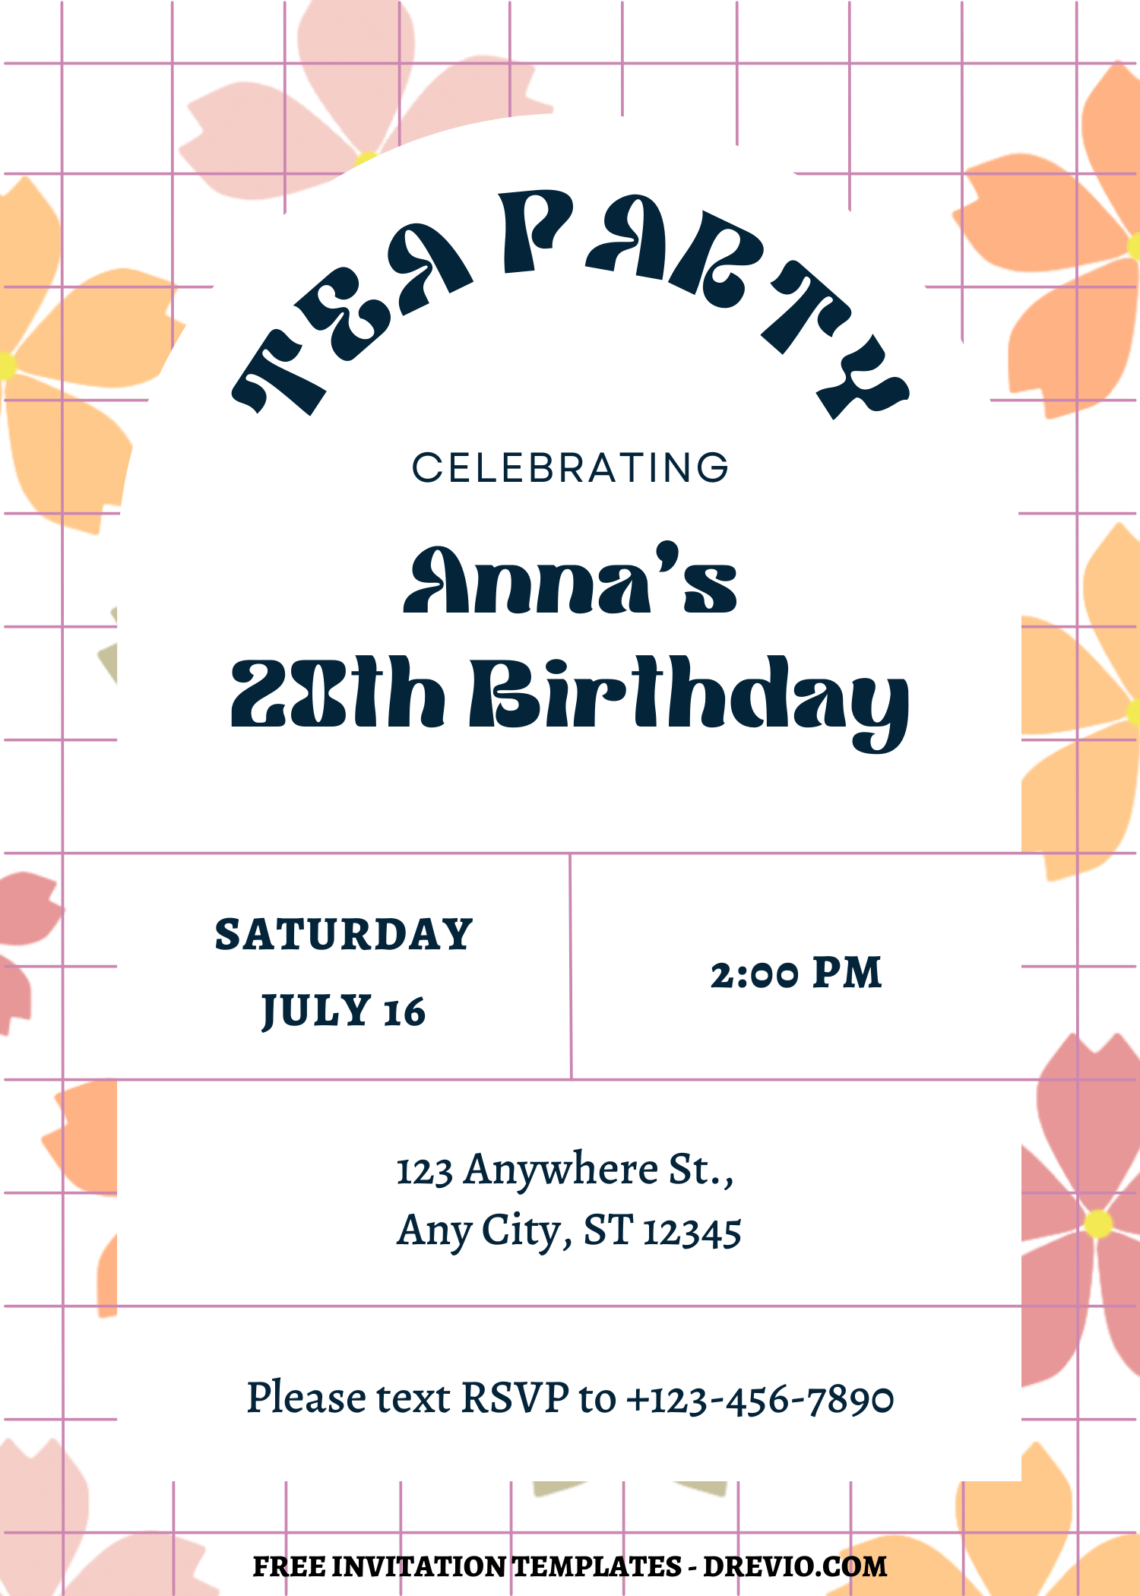 FREE PRINTABLE - Checkerboard Floral Canva Party Invitation Templates